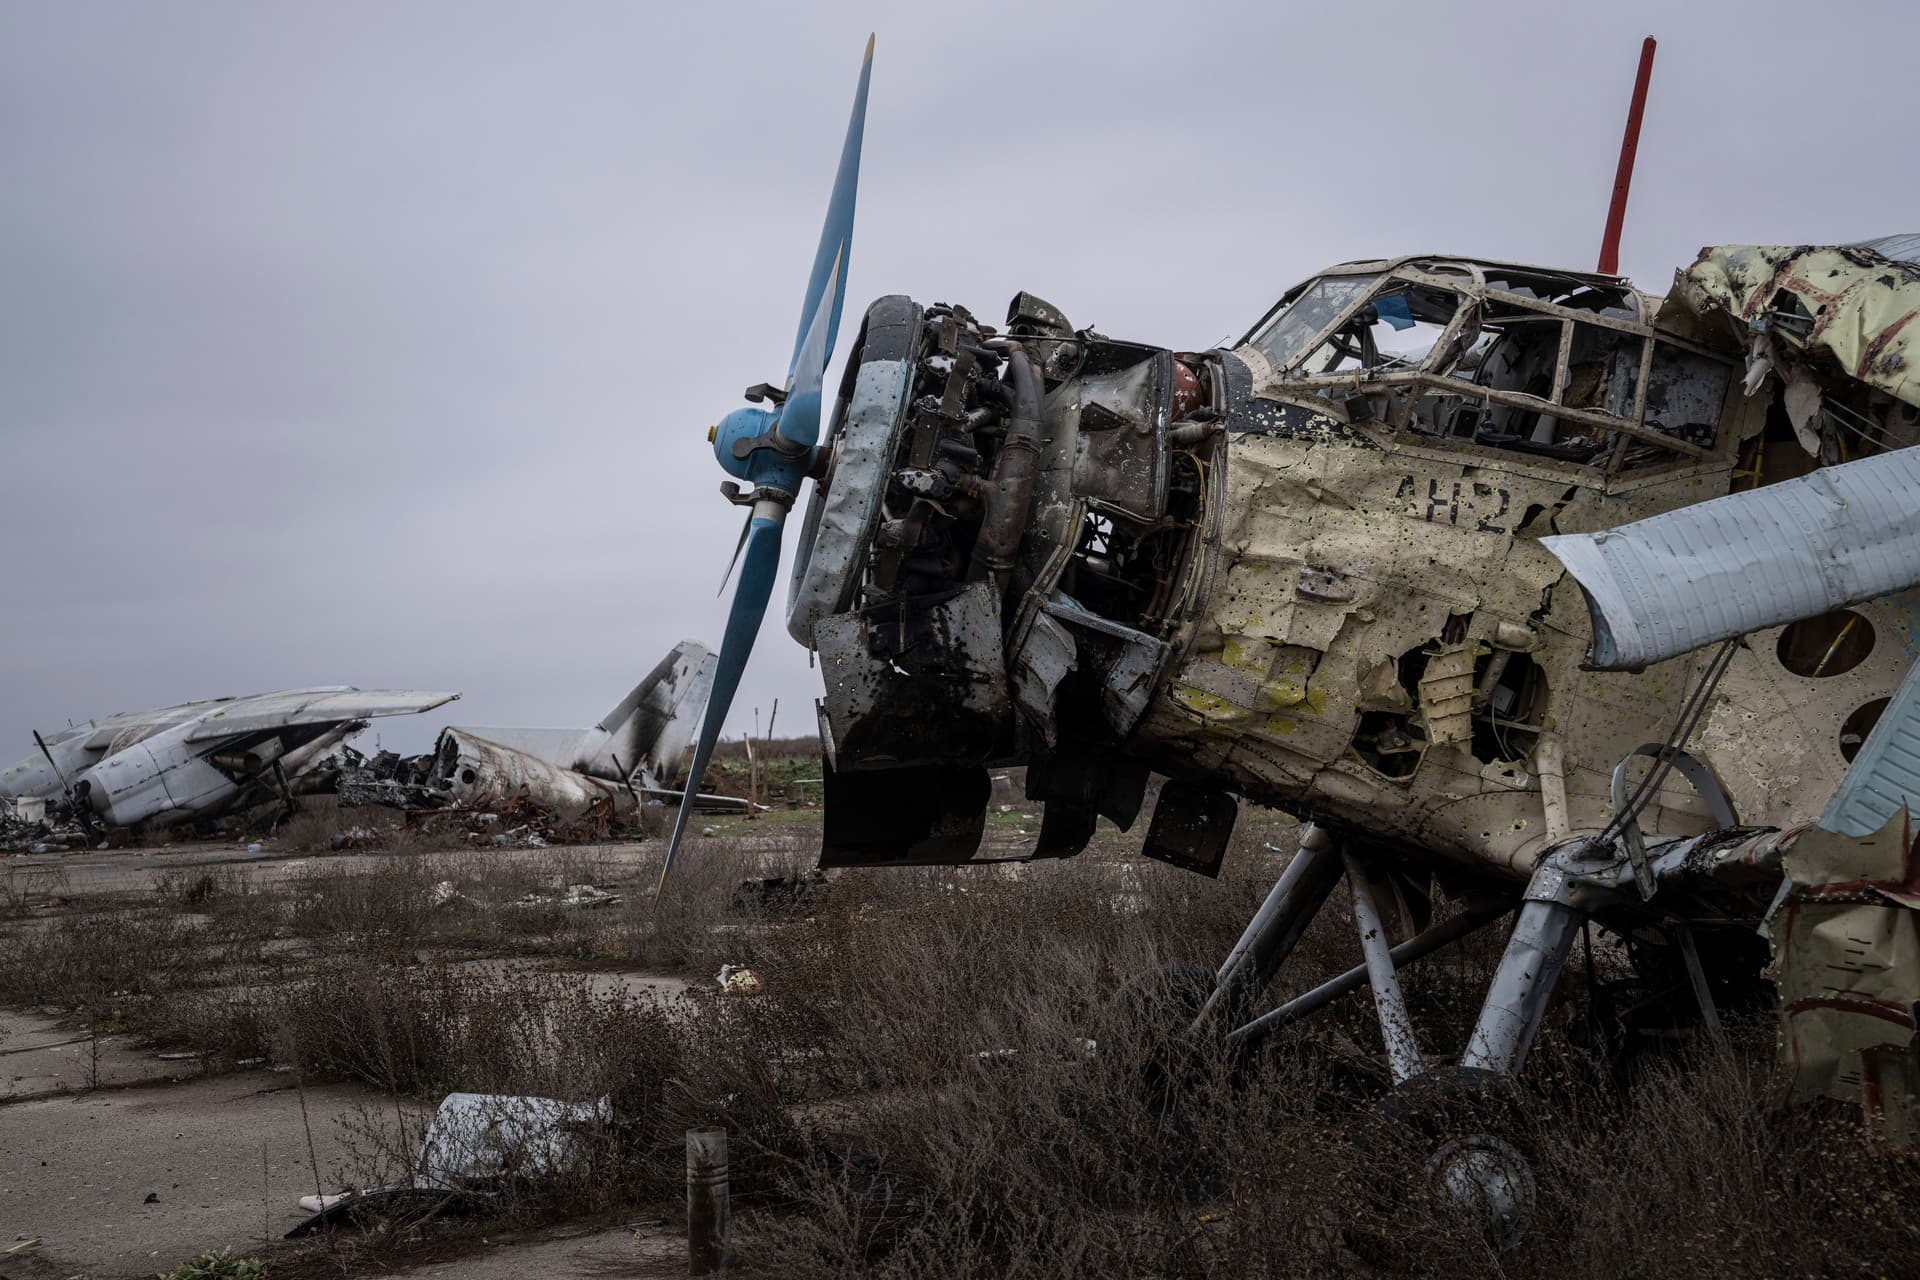 An aircraft that was destroyed during fighting between Ukrainian and Russian forces is seen at the Kherson international airport in Kherson